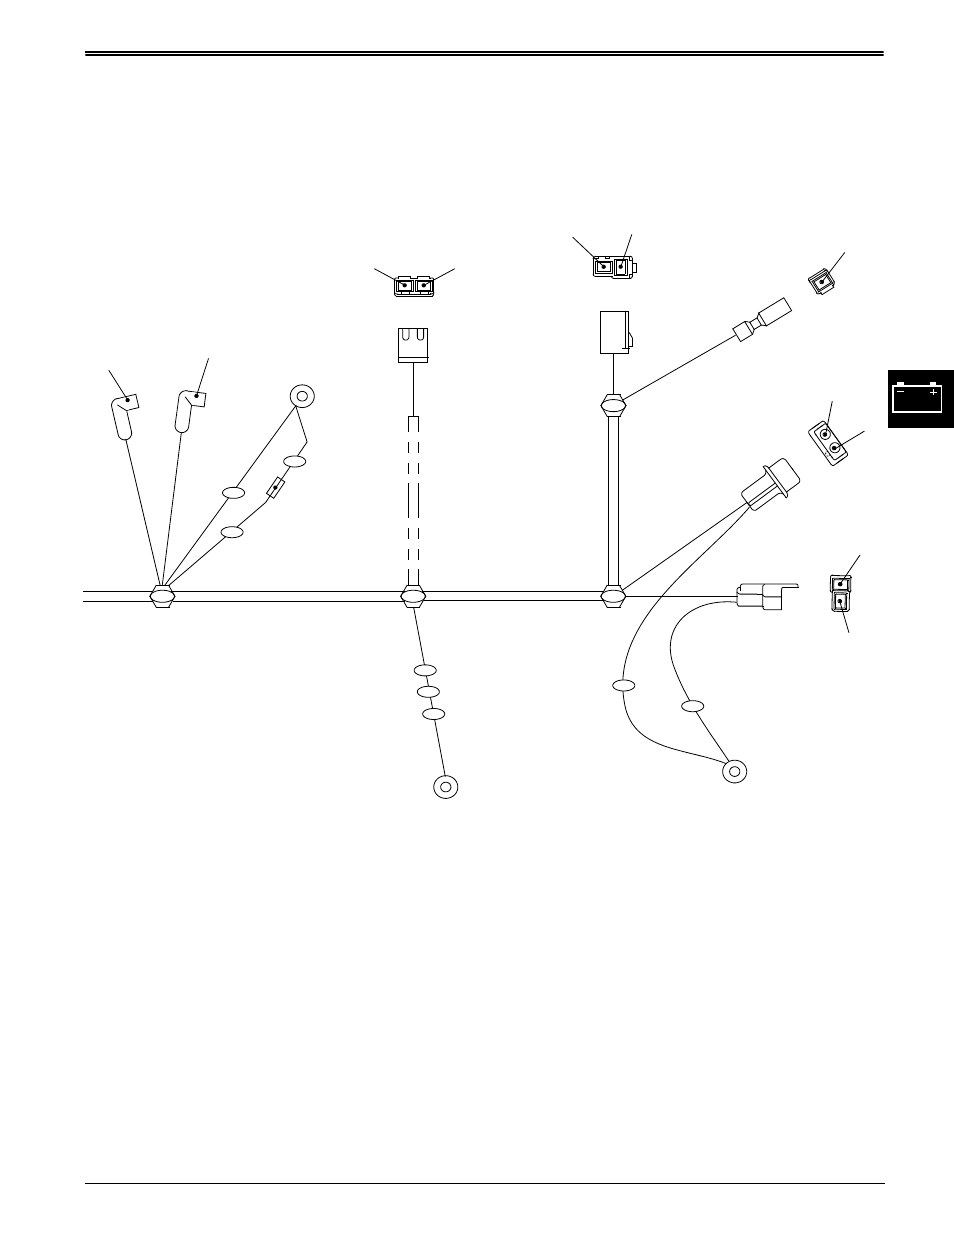 Wiring Harness Diagrams  Electrical